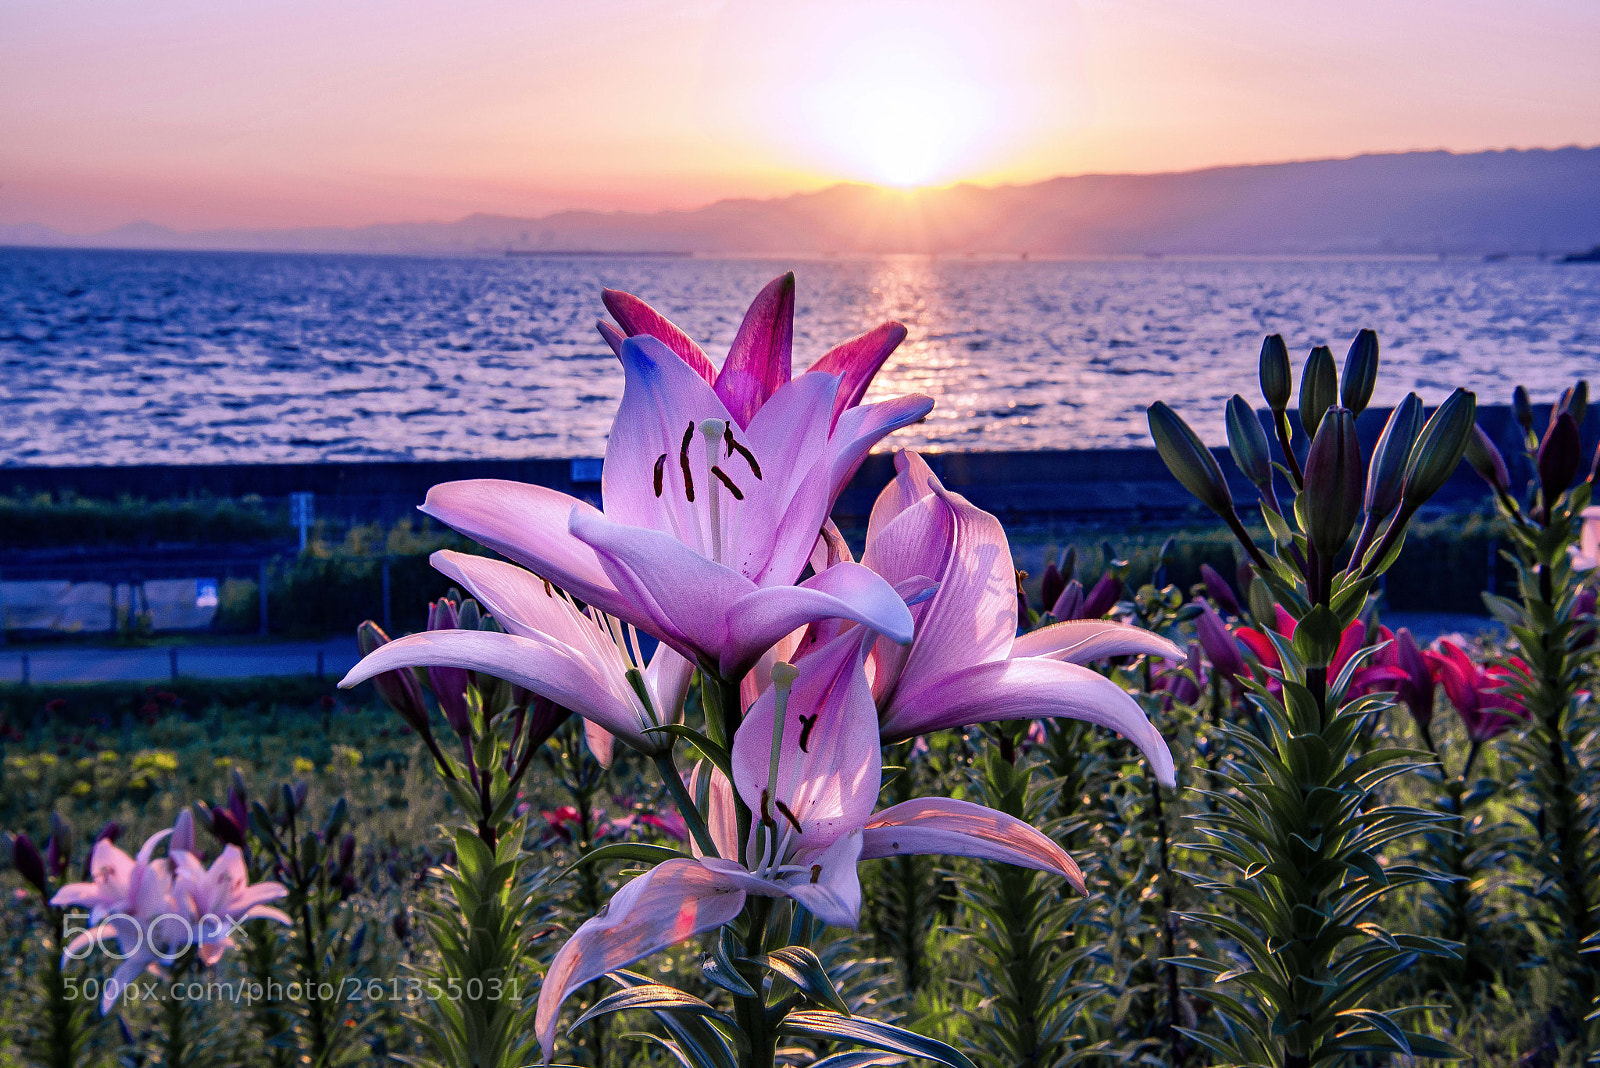 Nikon D800E sample photo. Evening scenery and lily photography